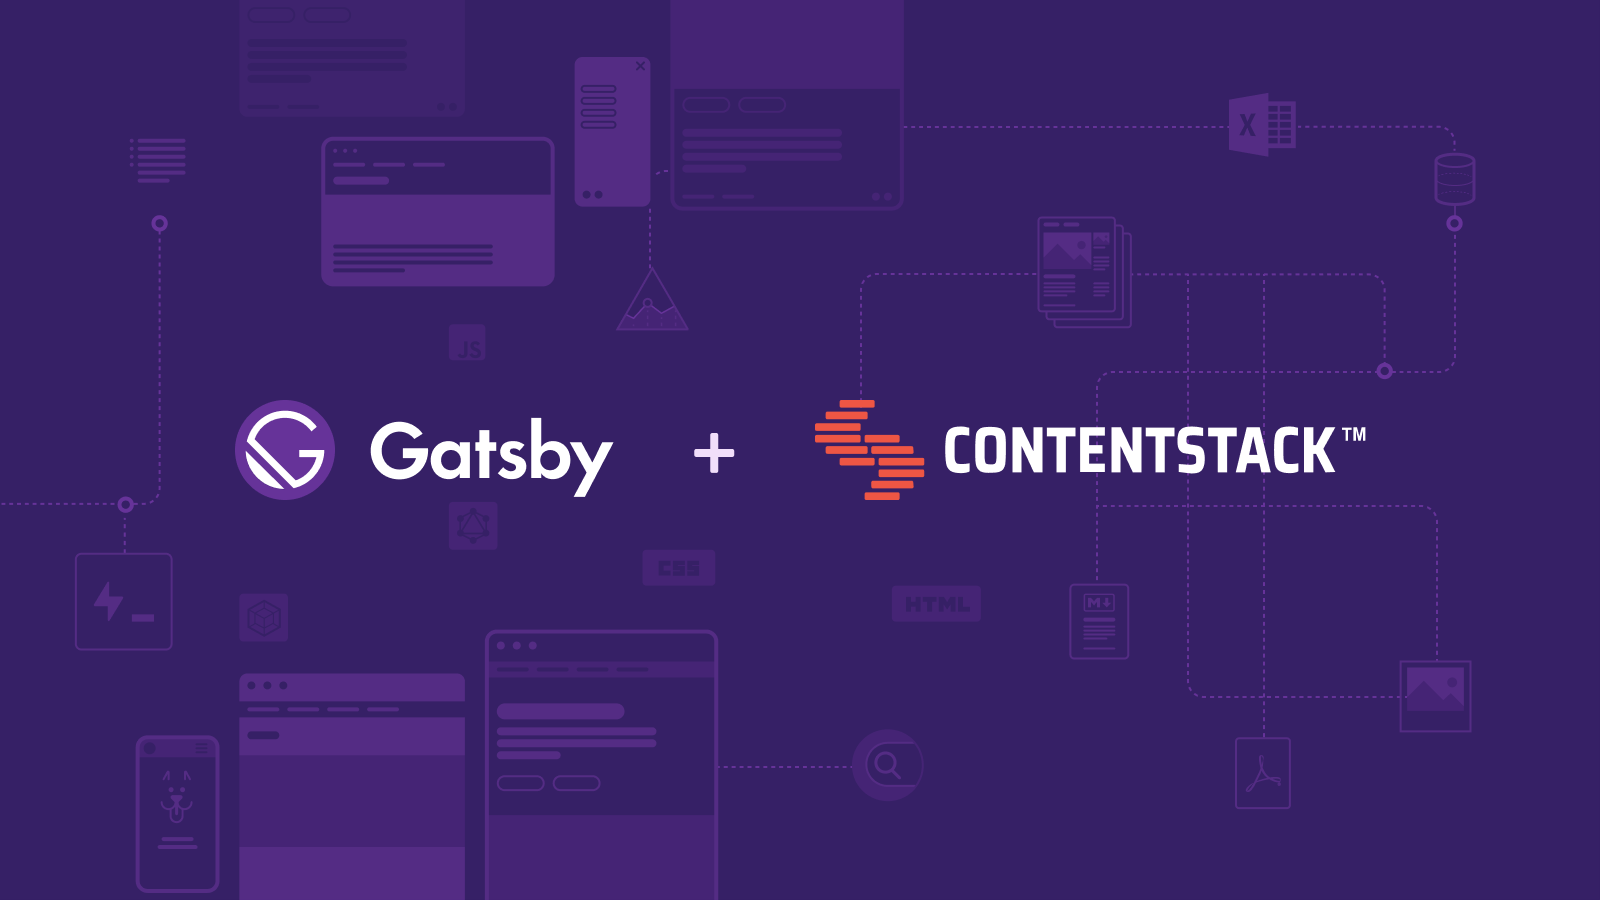 Contentstack and Gatsby Announce Partnership to Power Ultra-Fast Websites with Headless CMS